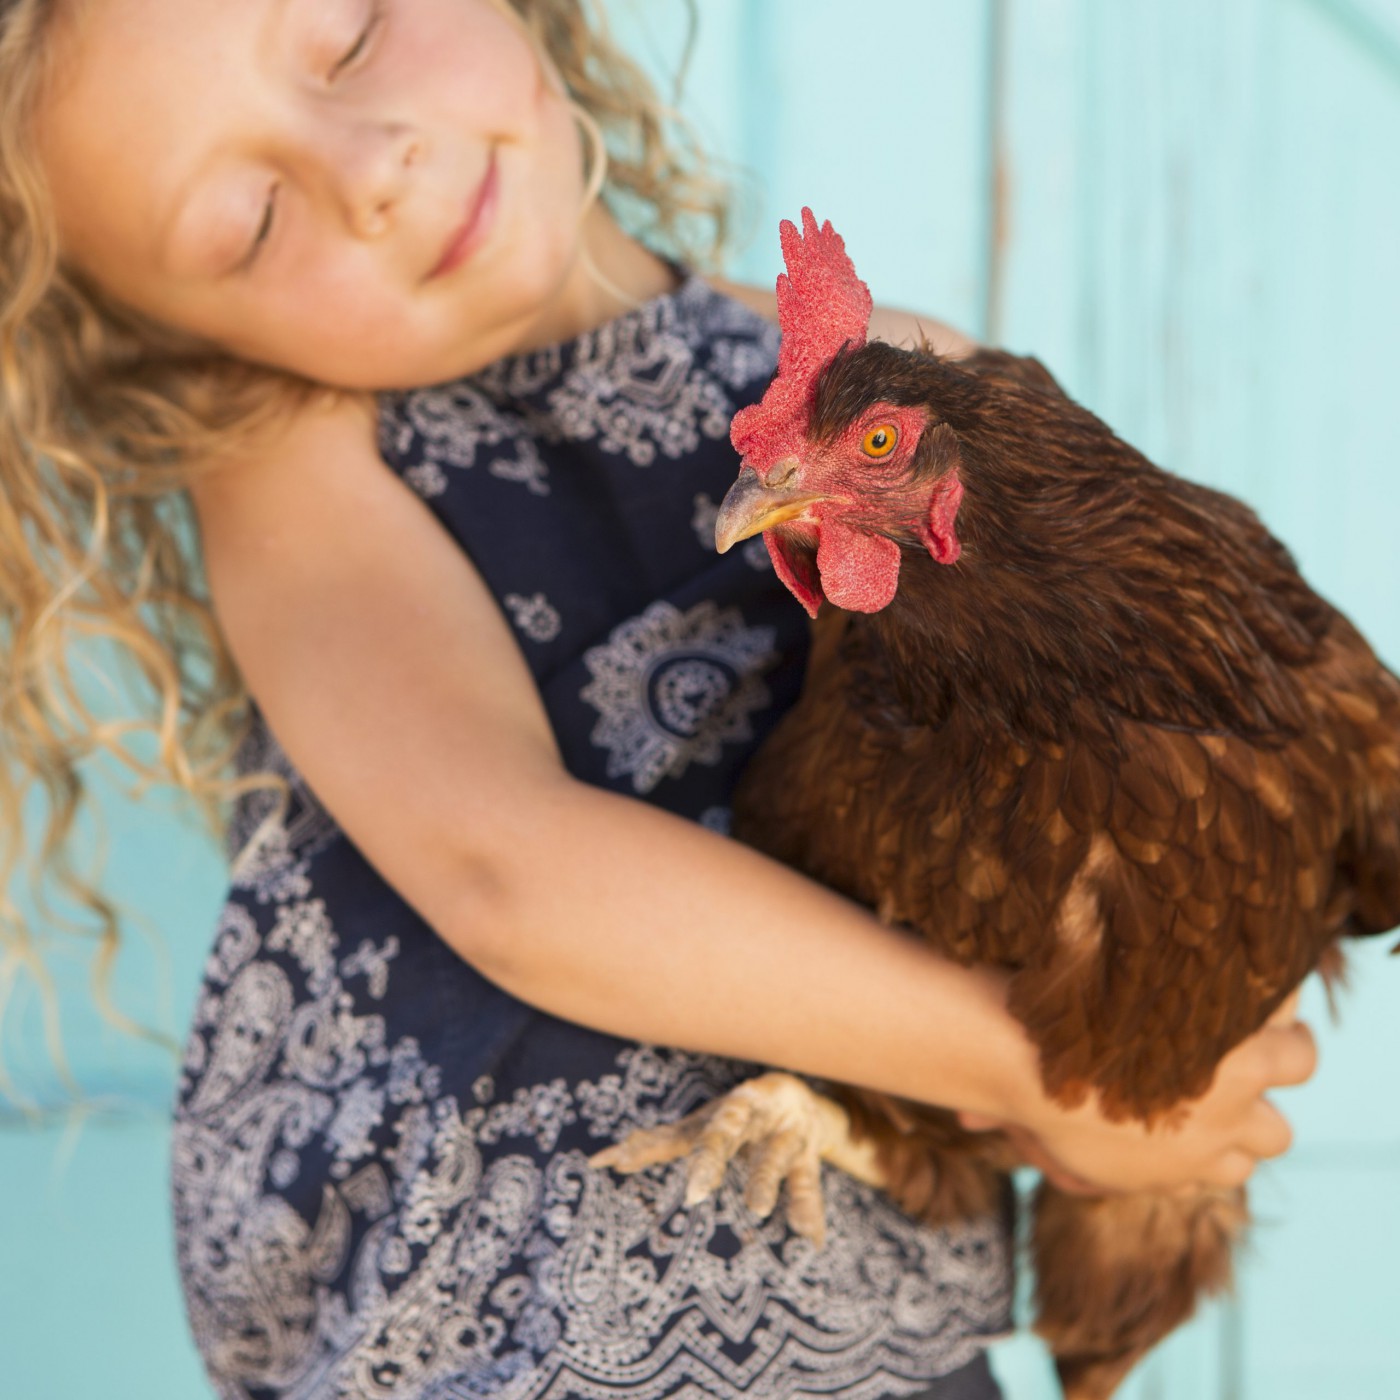 a-young-girl-holding-a-chicken-in-her-arms-9GBHCUA